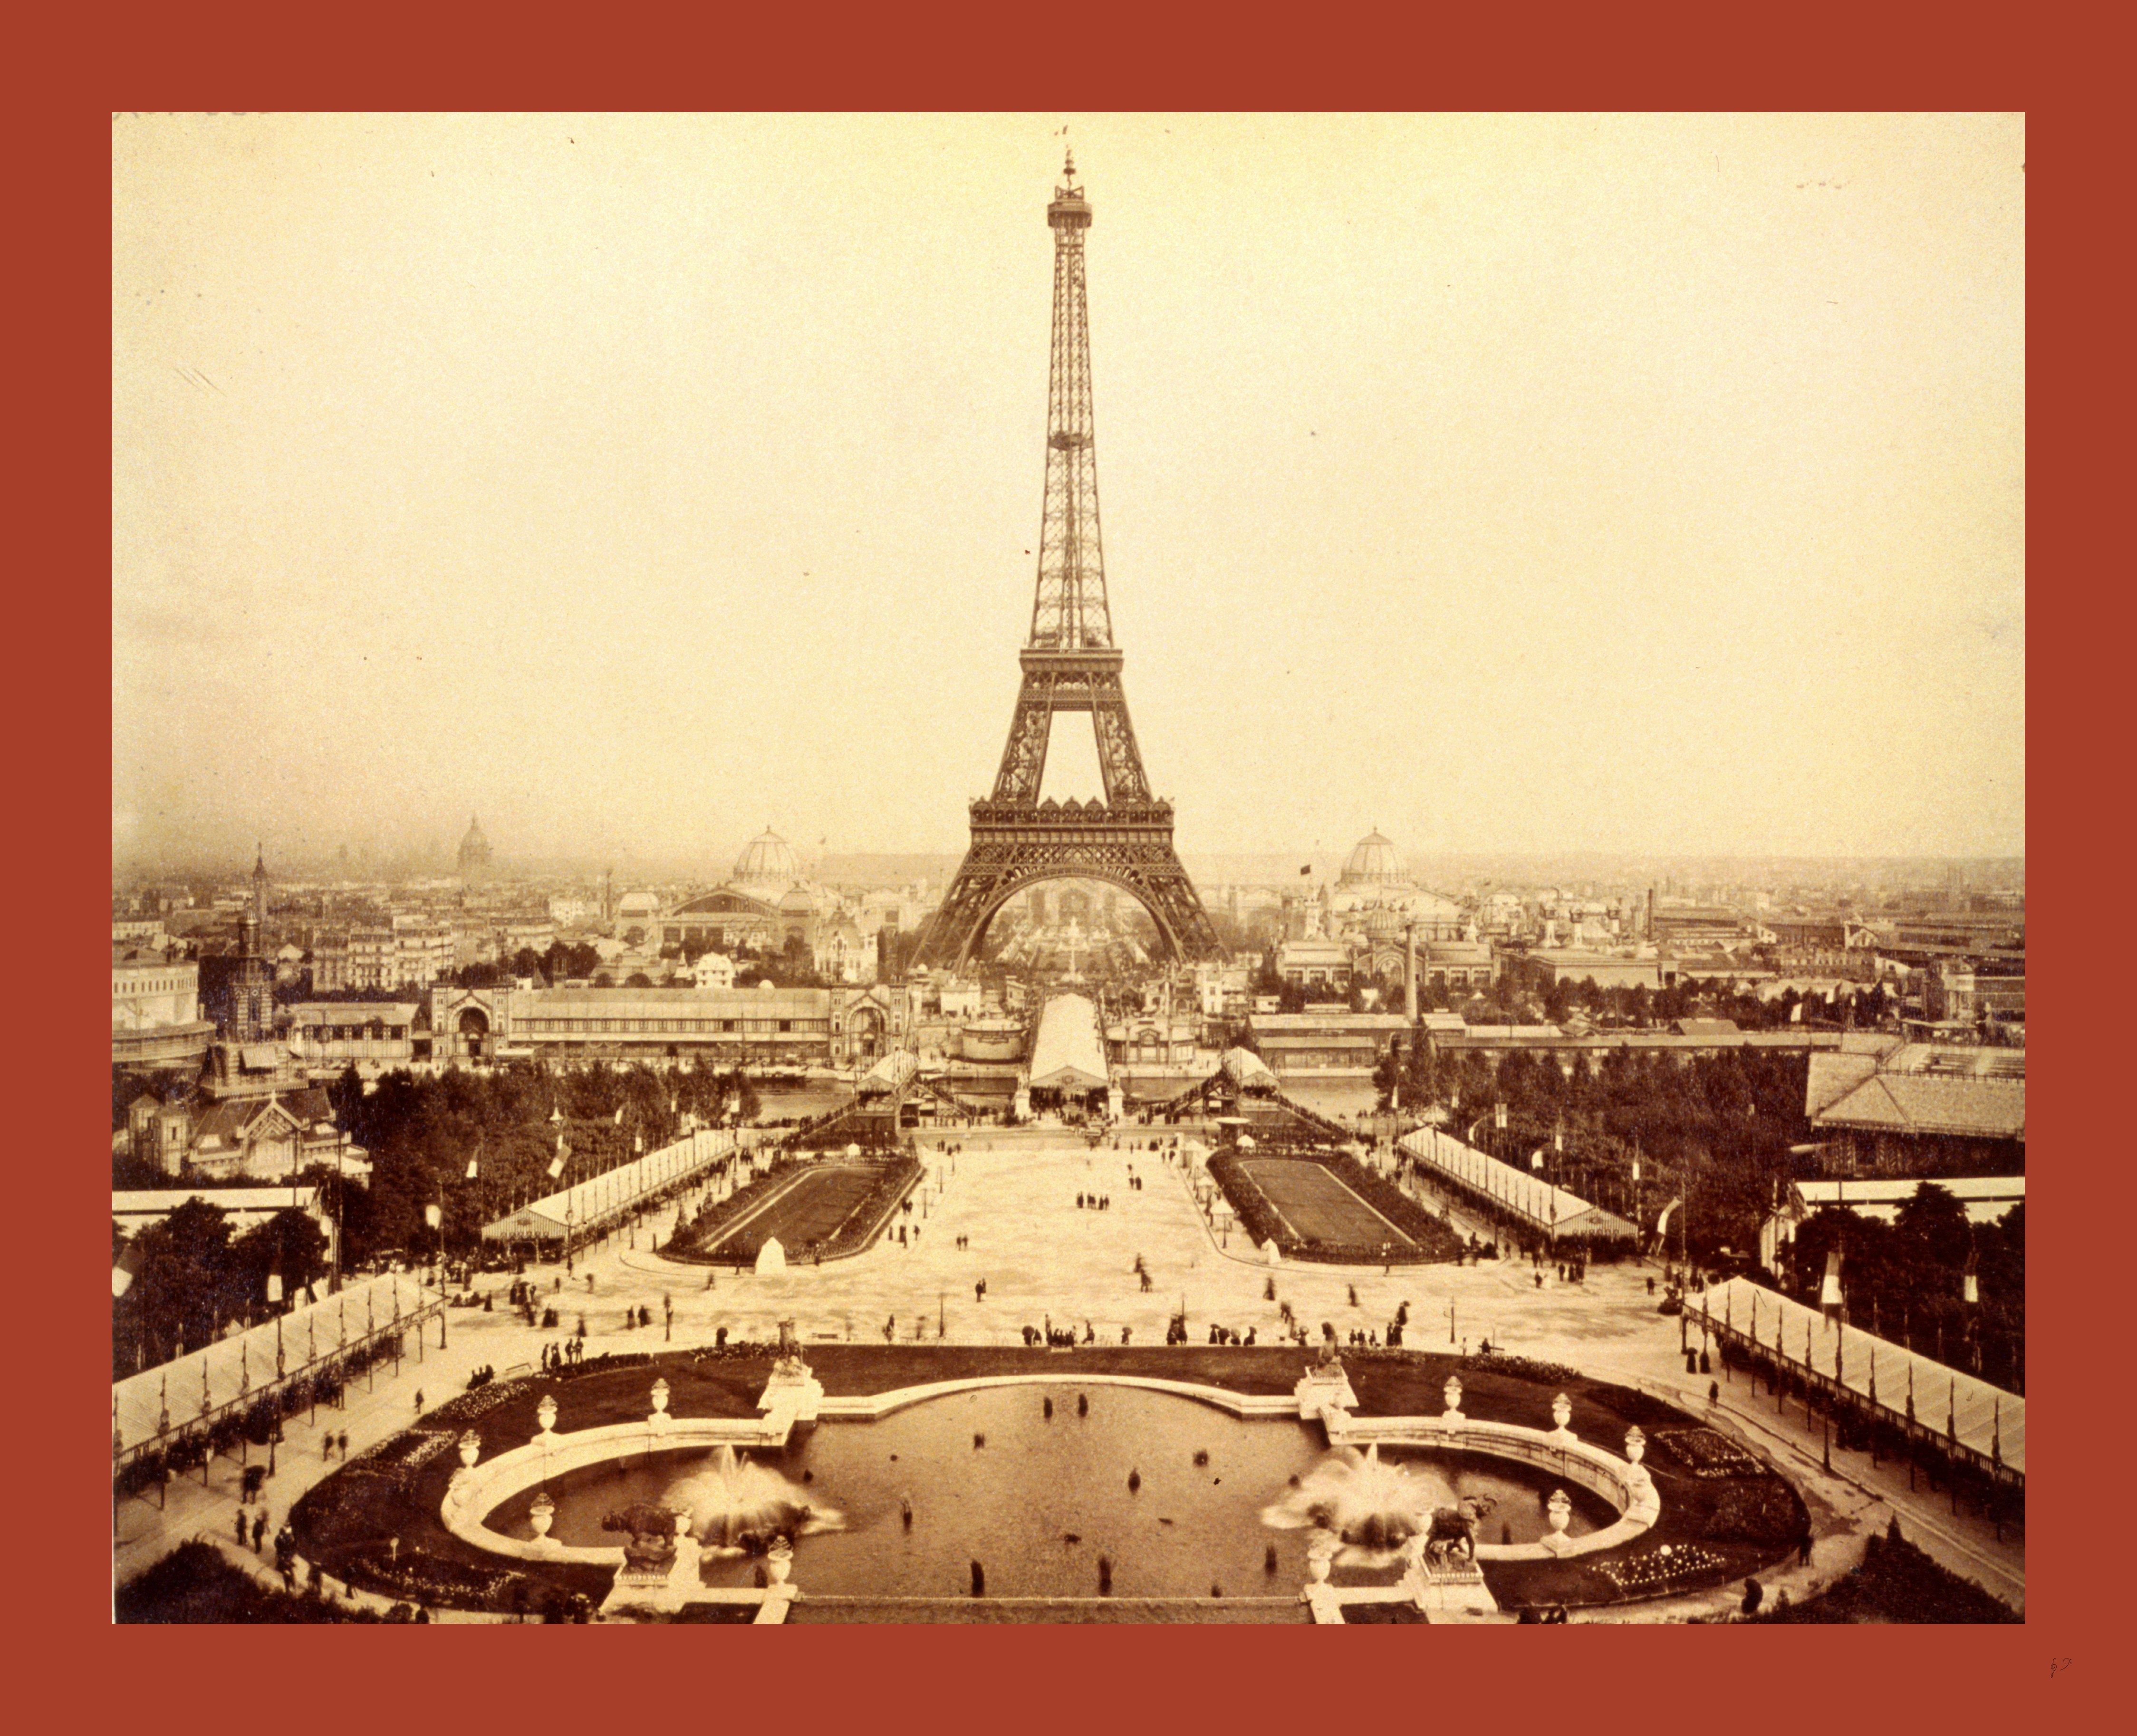 A black and white picture of the Eiffel Tower with a red border.